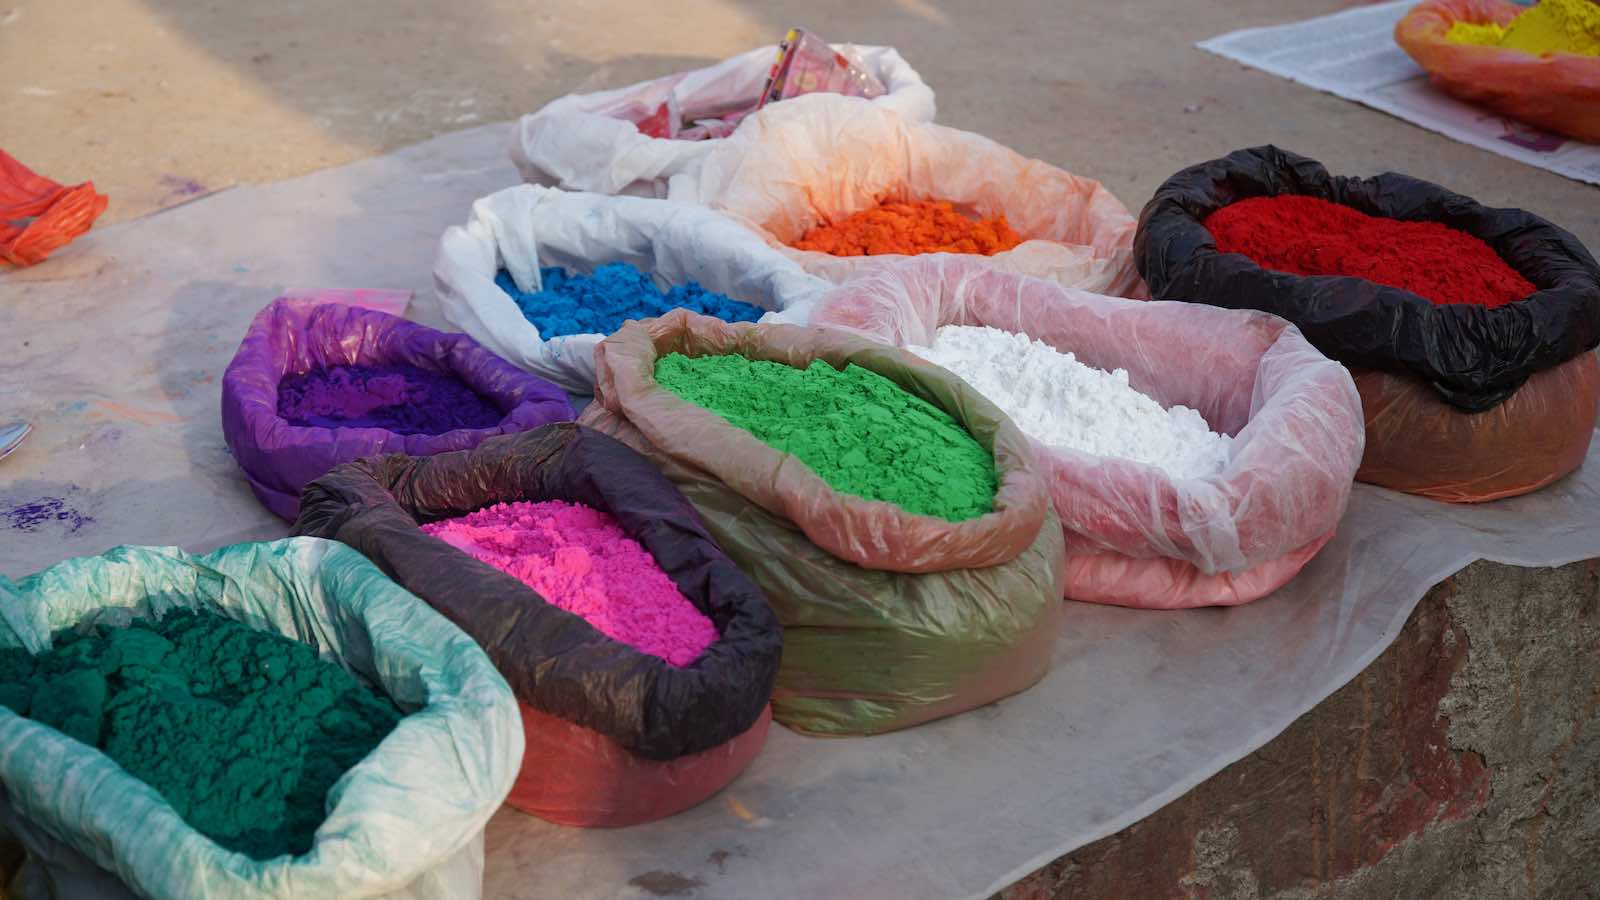 Saw a lot of people on the street selling the festive colored powders.